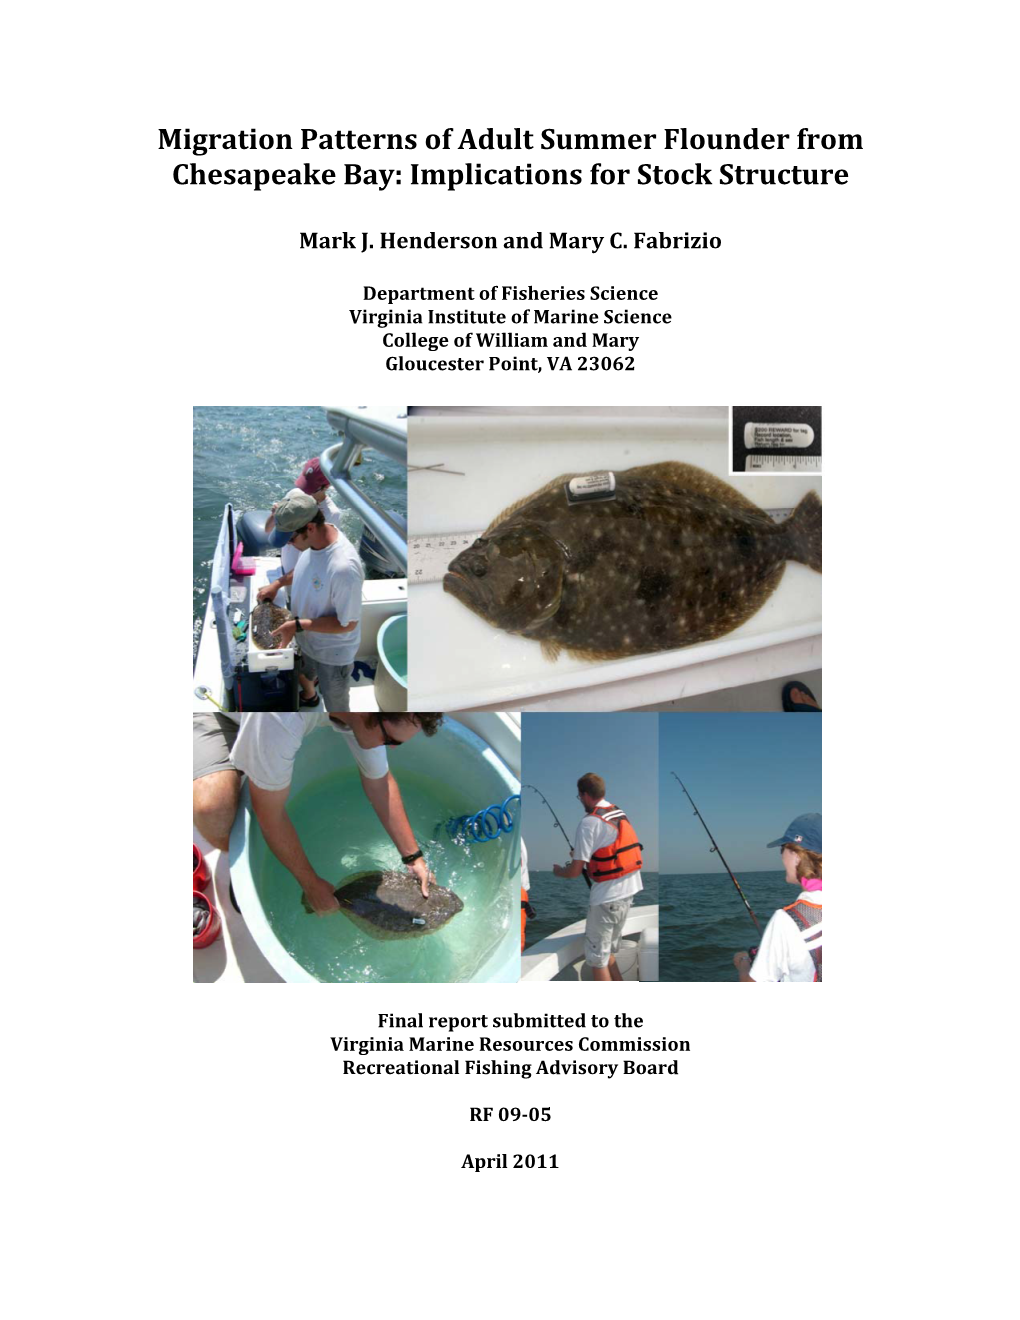 Migration Patterns of Adult Summer Flounder from Chesapeake Bay: Implications for Stock Structure